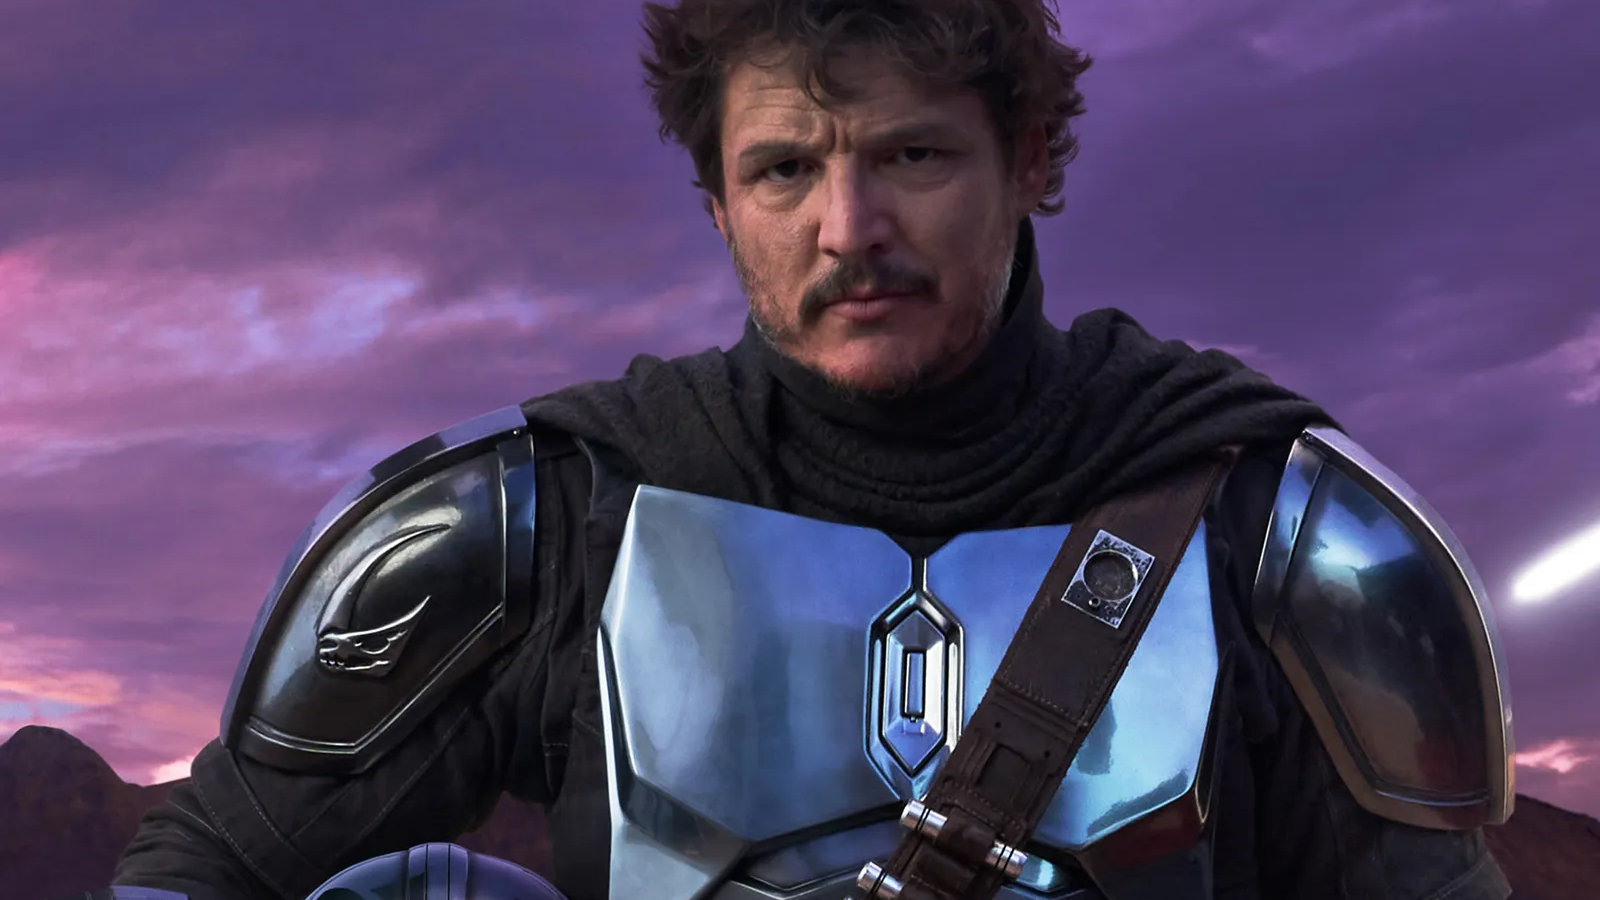 Pedro Pascal: The Mandalorian Season 3 Was 'Mostly a Voice Over